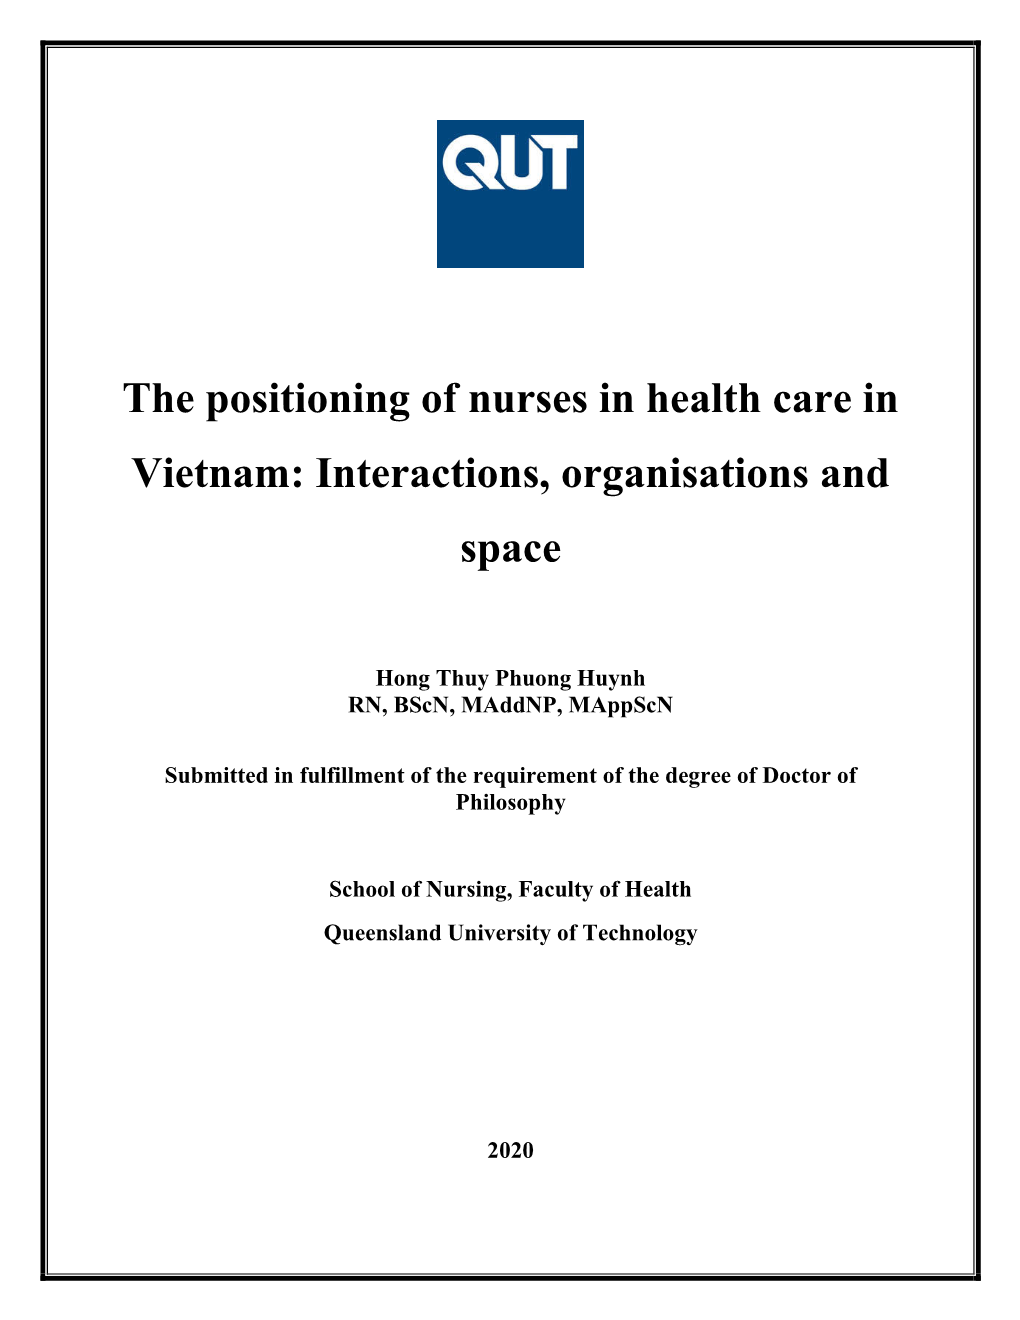 The Positioning of Nurses in Health Care in Vietnam: Interactions, Organisations and Space